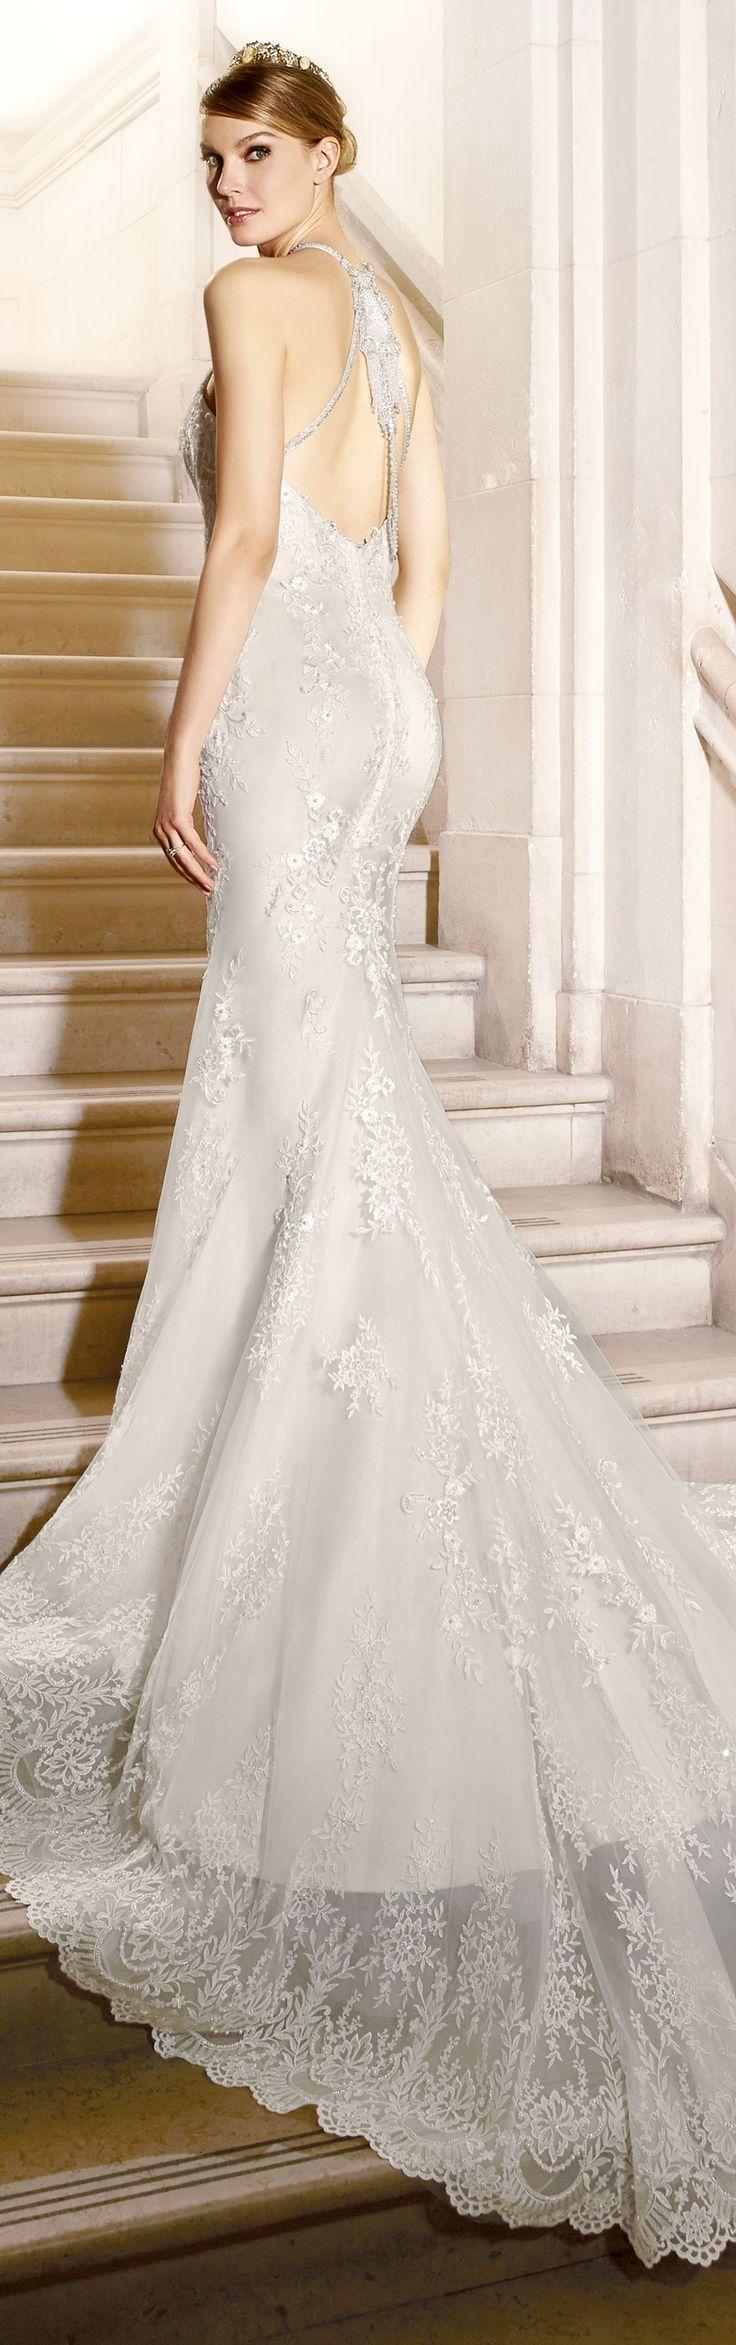 Hochzeit - Lace And Beaded Halter Neck Mermaid Wedding Gown  